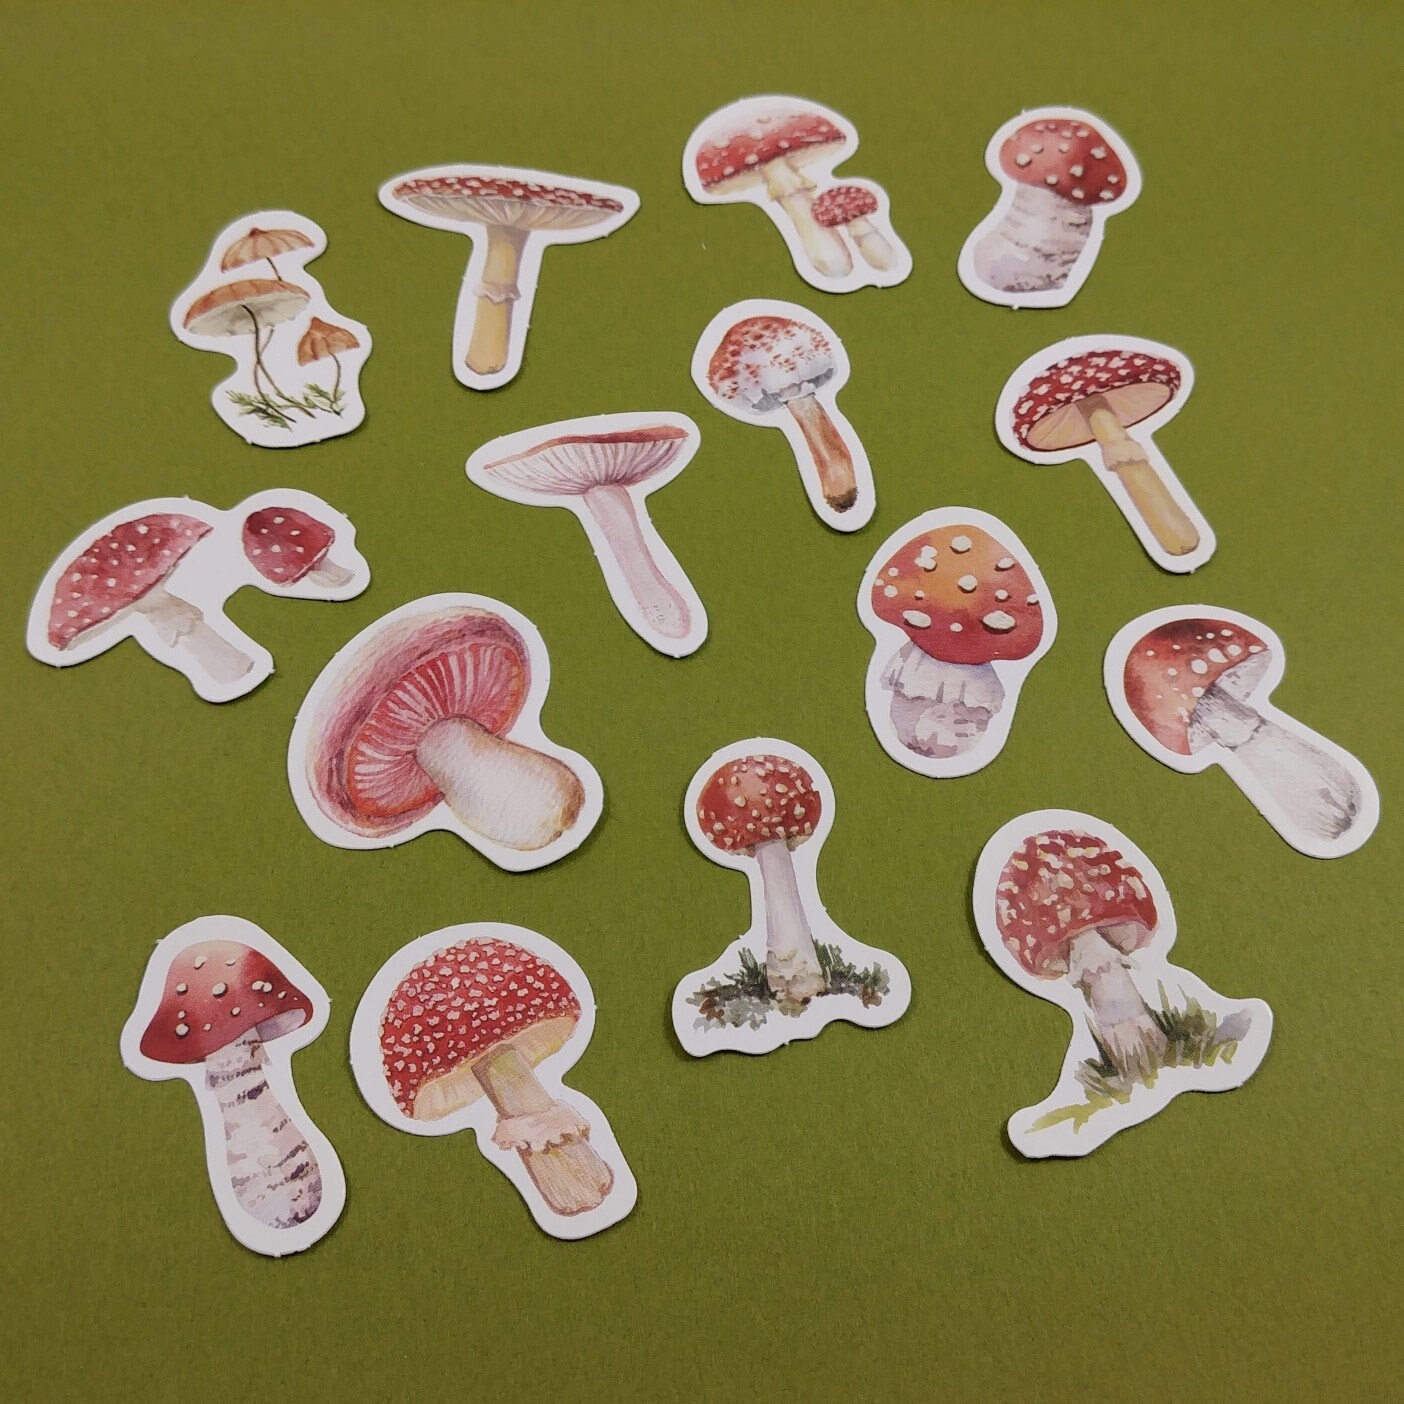 HINZIC 200pcs Red Strawberry Stickers, Self Adhesive Mushroom Sticker  Botanical Stickers Transparent Flower Stickers for Scrapbooking Vintage  Plant